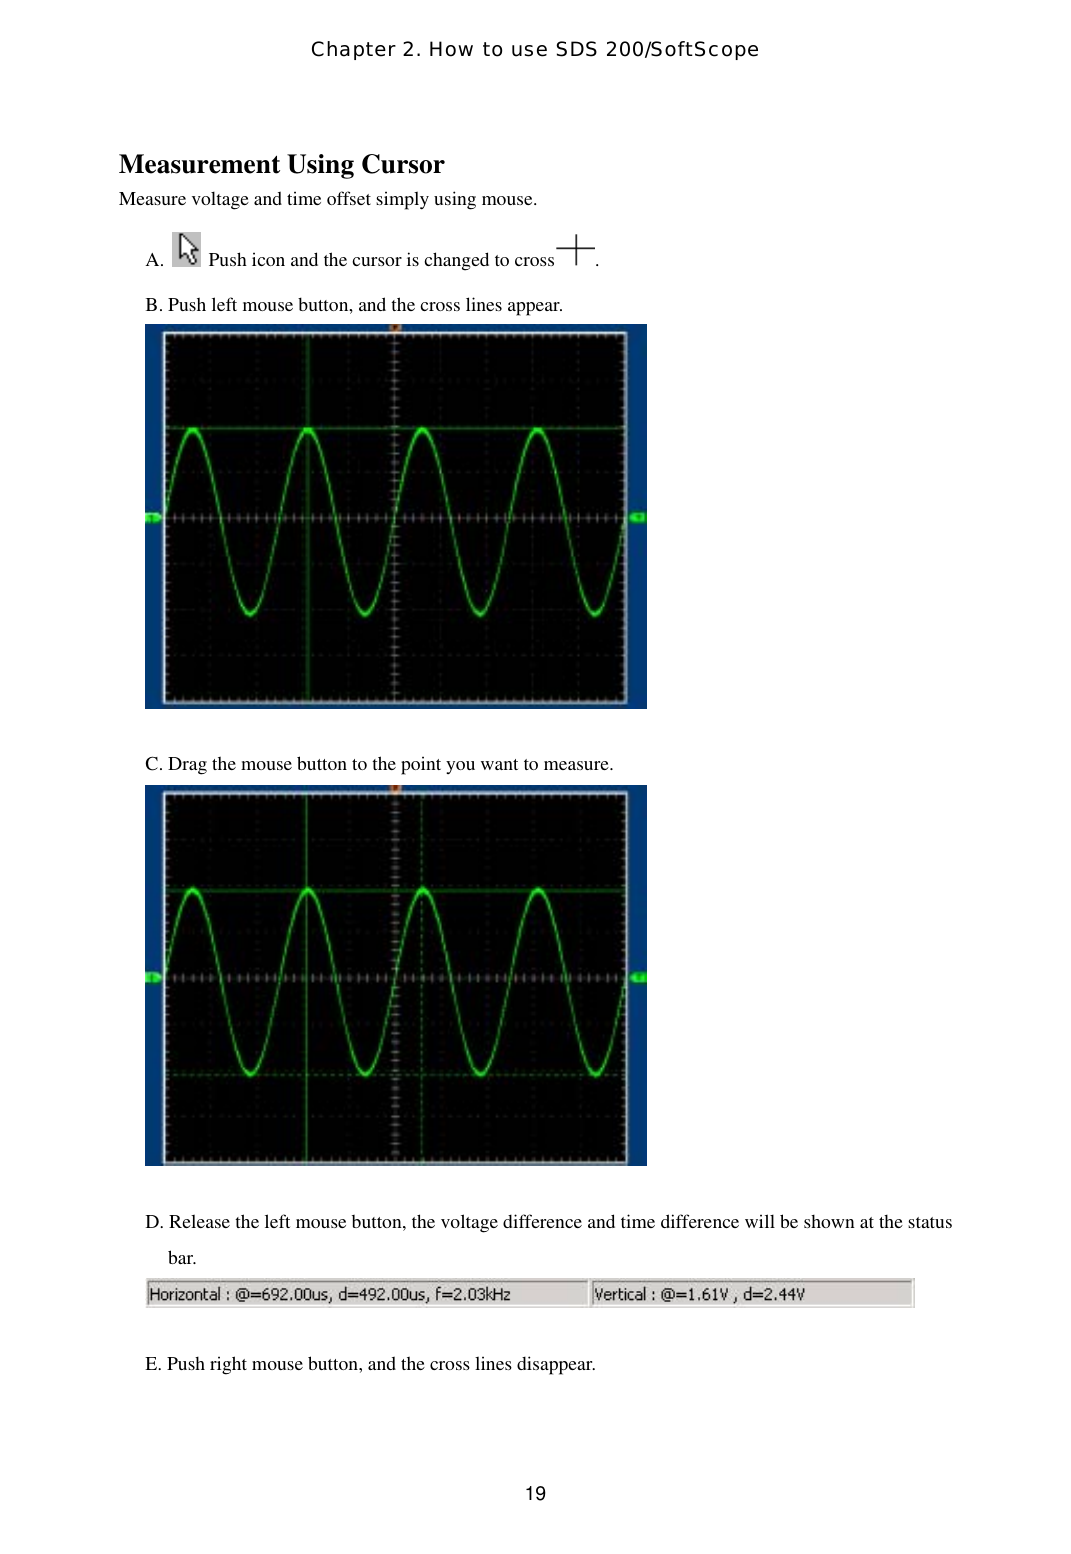 Chapter 2. How to use SDS 200/SoftScope  19Measurement Using Cursor Measure voltage and time offset simply using mouse. A.    Push icon and the cursor is changed to cross . B. Push left mouse button, and the cross lines appear.   C. Drag the mouse button to the point you want to measure.   D. Release the left mouse button, the voltage difference and time difference will be shown at the status bar.   E. Push right mouse button, and the cross lines disappear.   